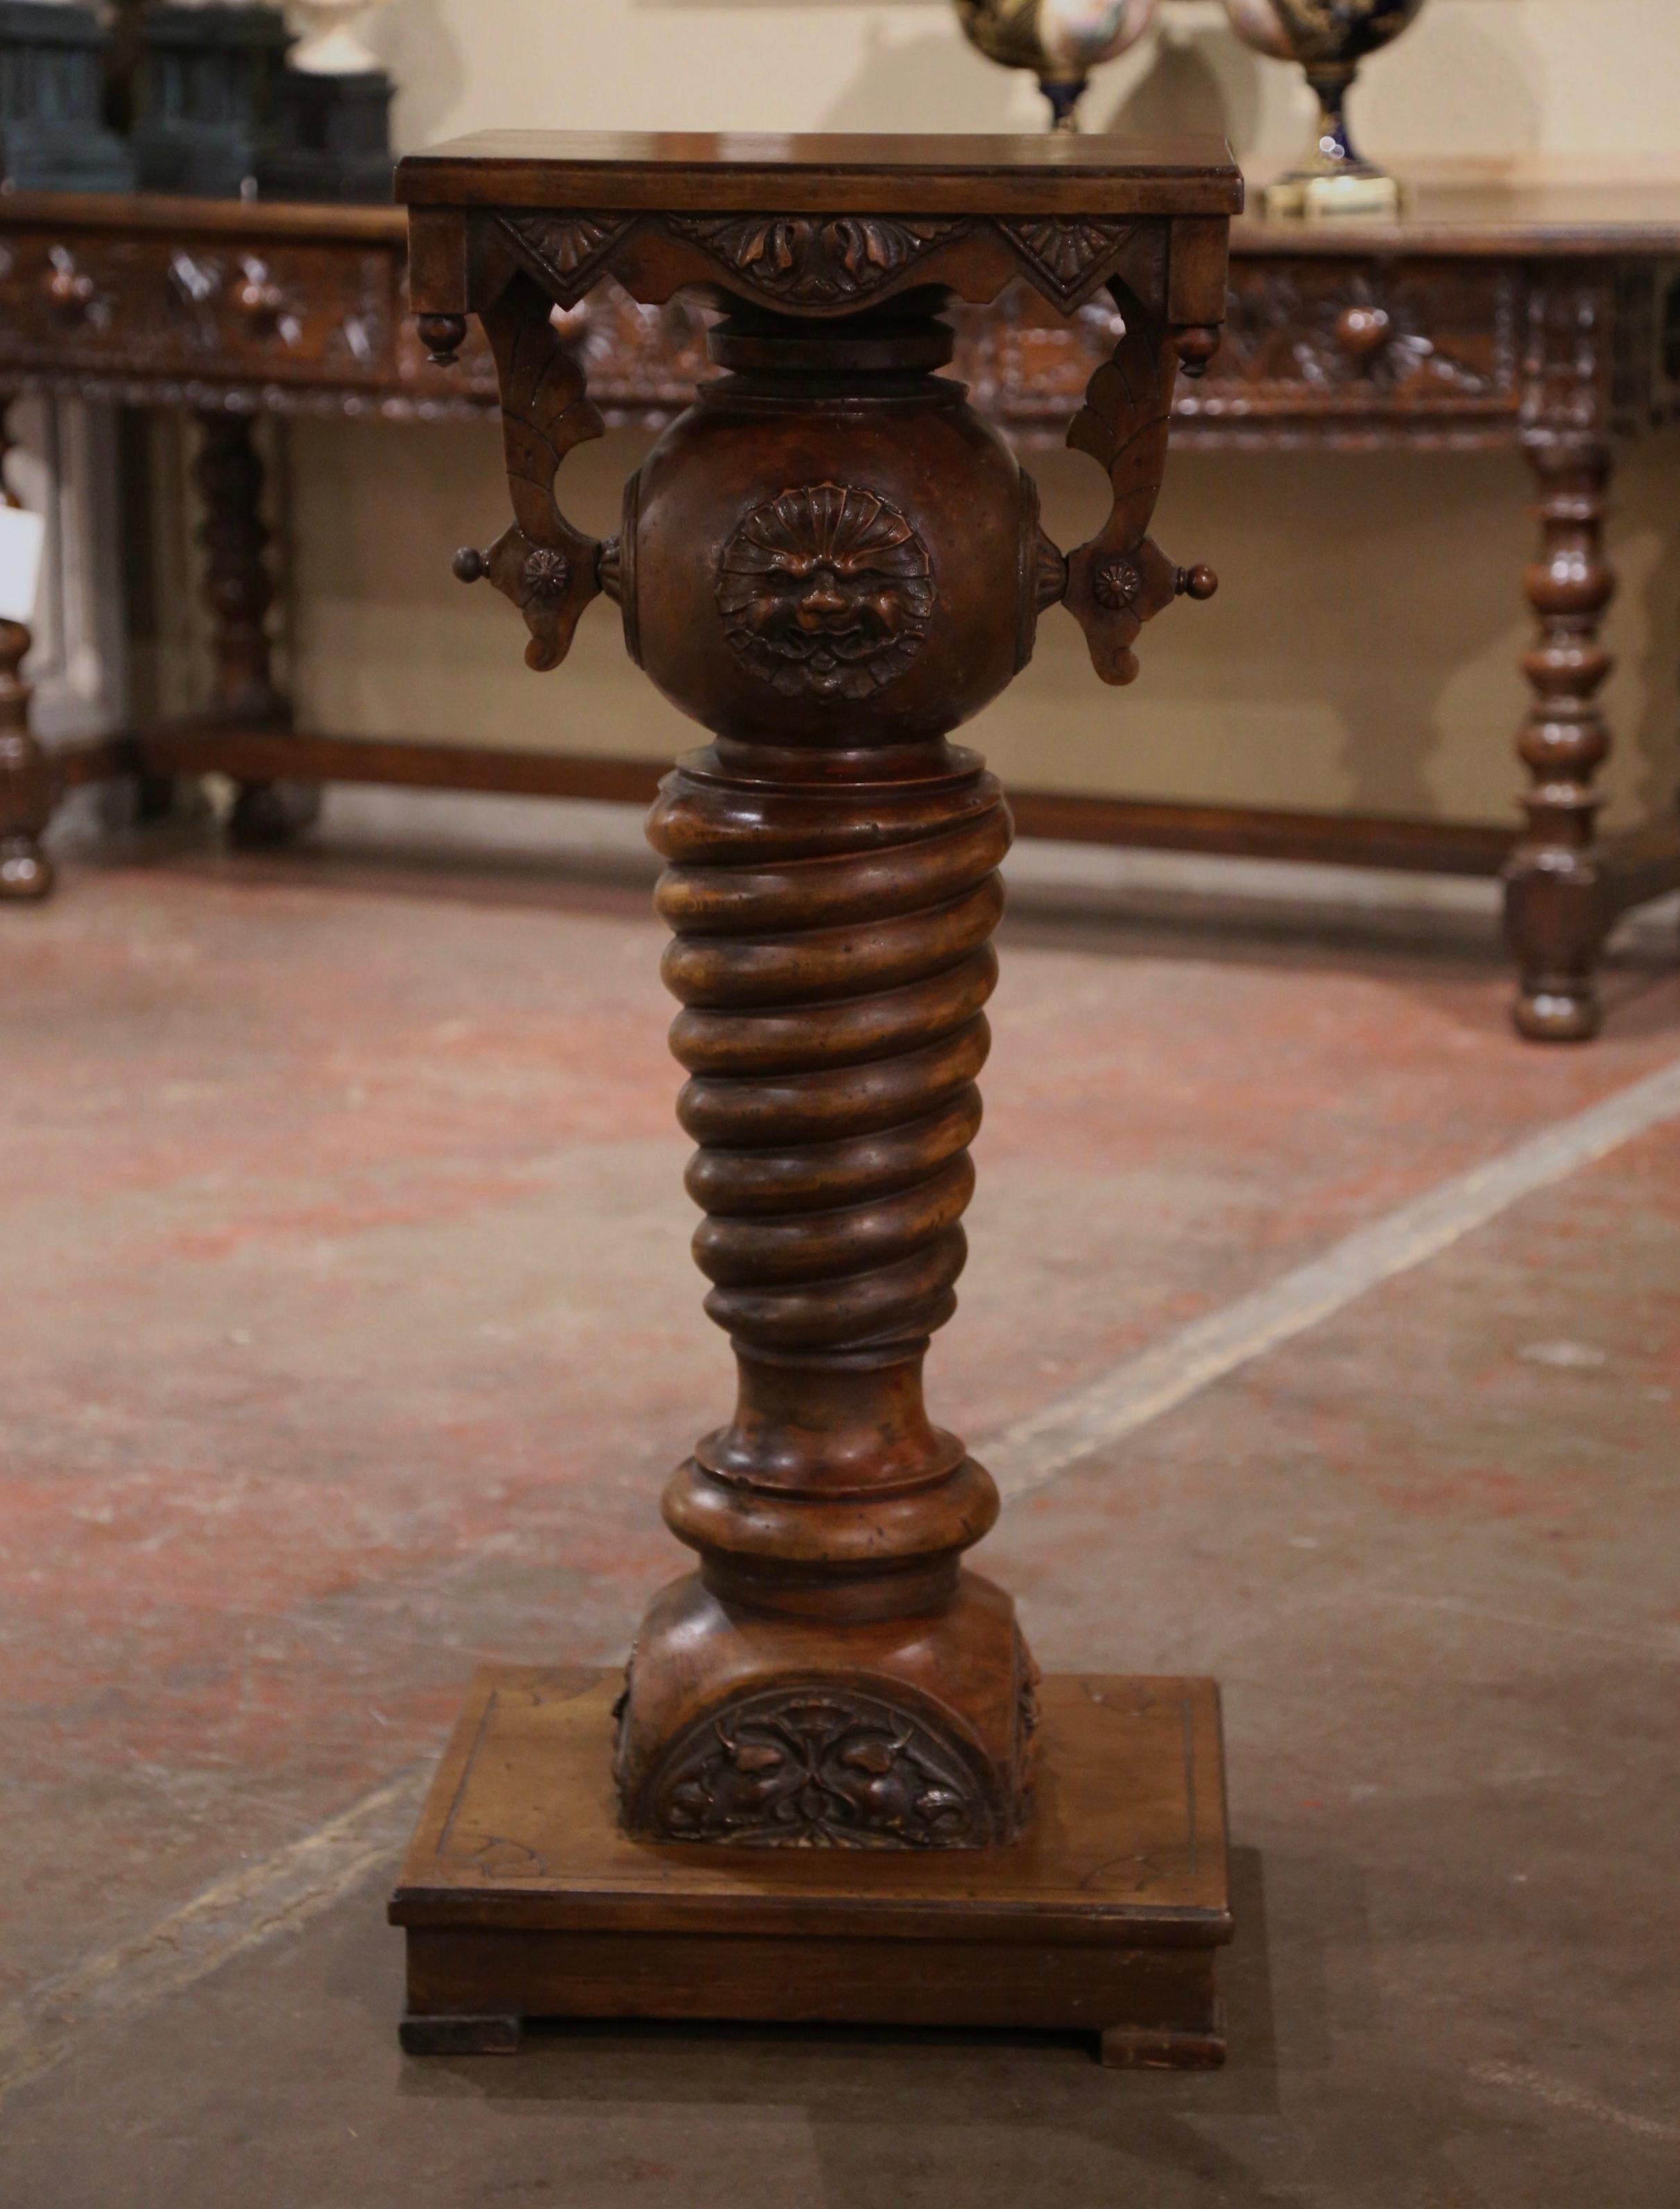 Display a bust or a flower vase on this elegant, antique pedestal. Crafted in Southern France circa 1920 and built of mahogany, the column sits on a thick decorative rectangular plinth ending with bracket feet. The pedestal features a hand carved